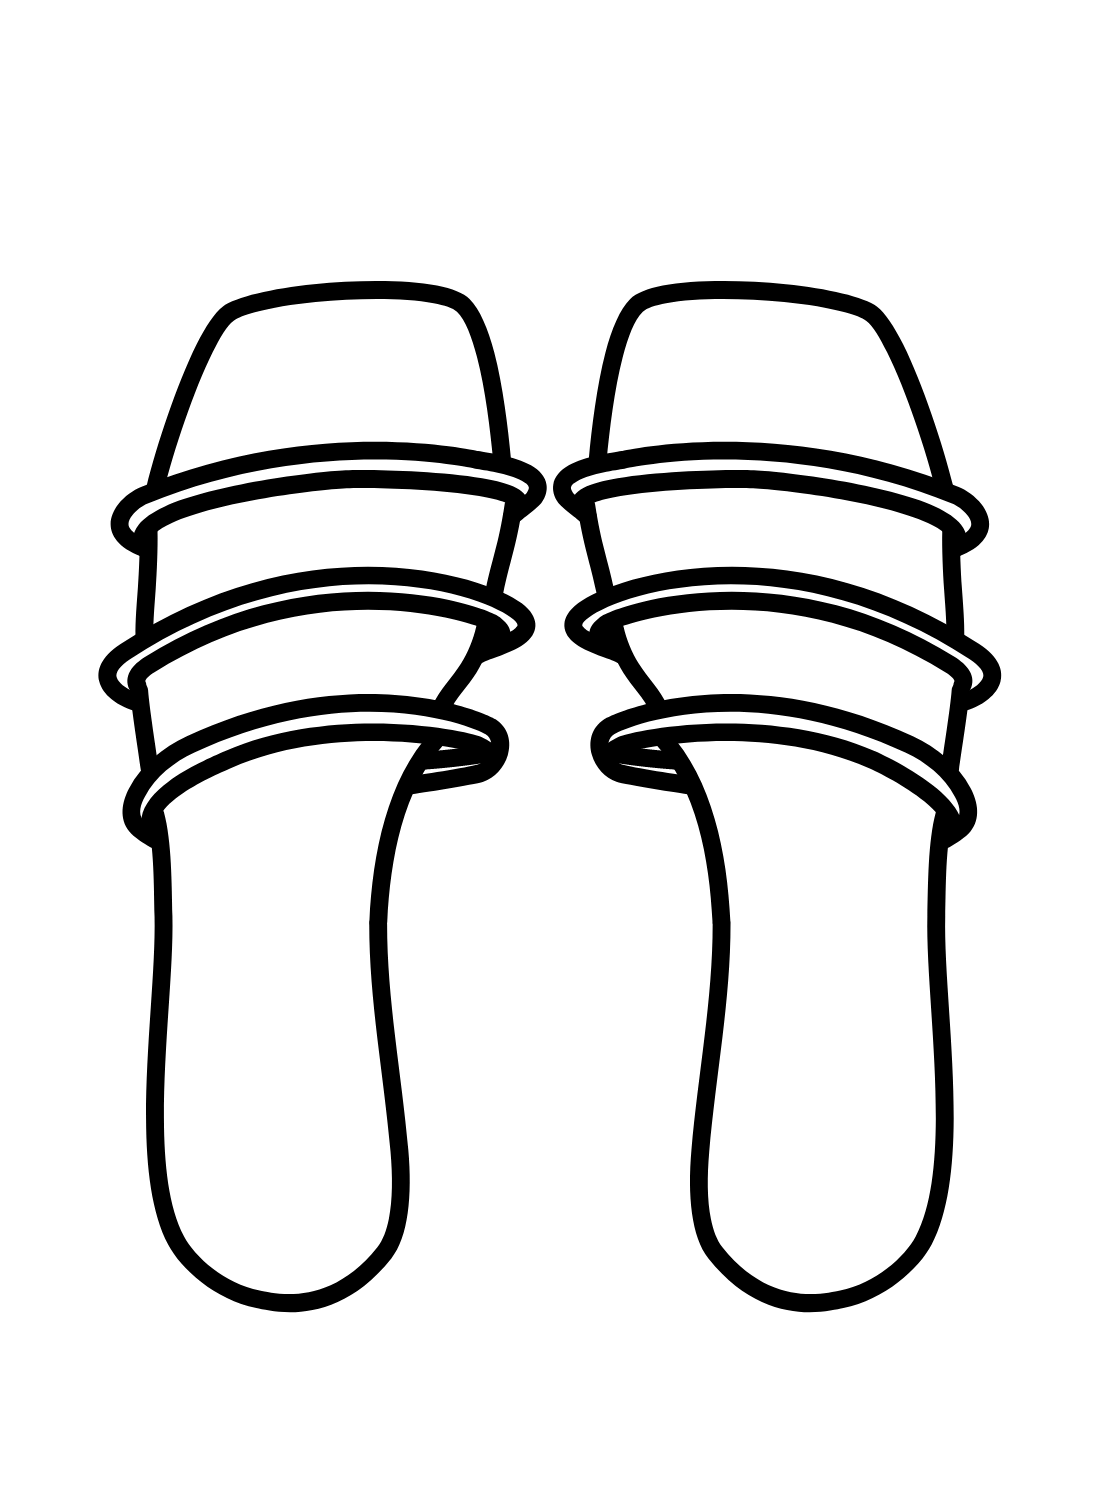 Sandals Drawing Coloring Page - Free Printable Coloring Pages